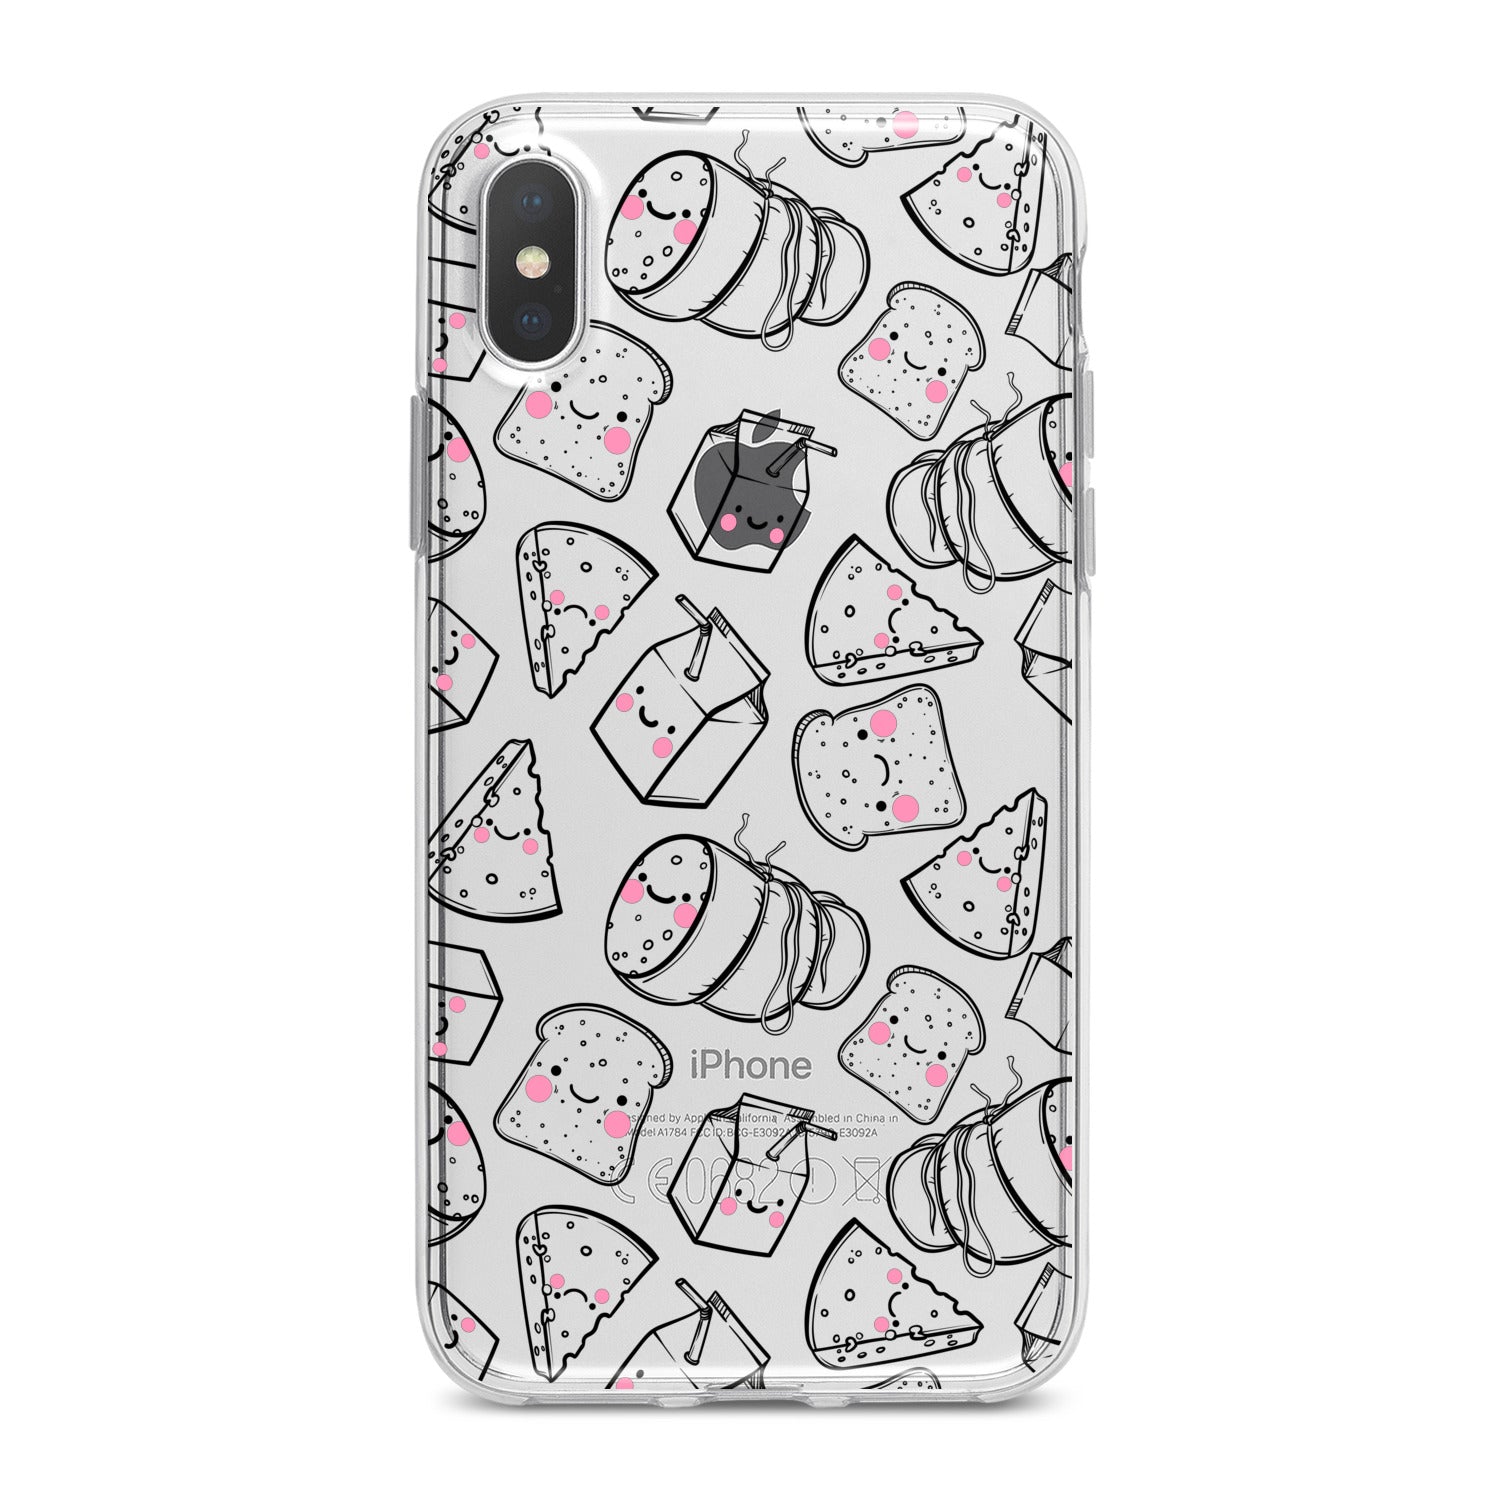 Lex Altern Food Graphic Phone Case for your iPhone & Android phone.